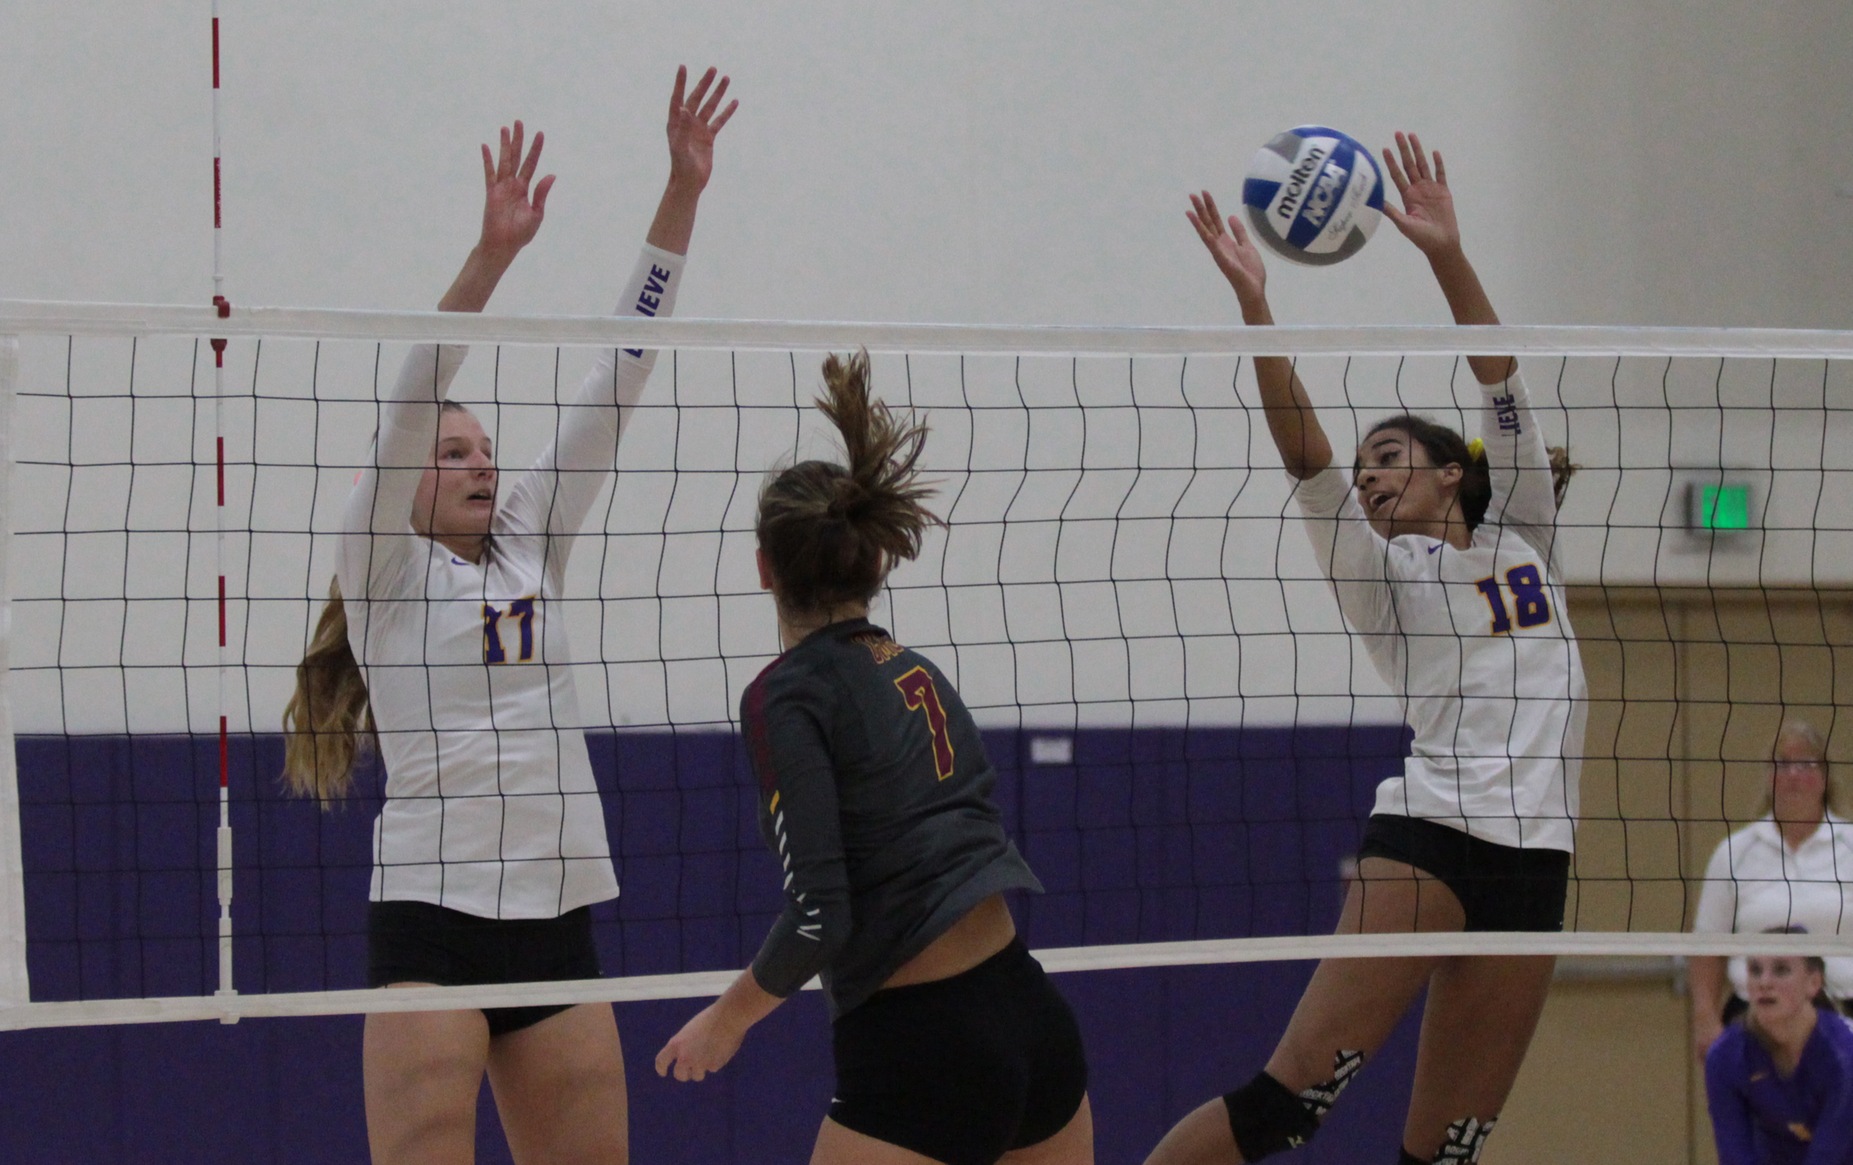 Samantha Landrum and Tylor Johnson combine for a block as the Regals take down CMS 3-2.